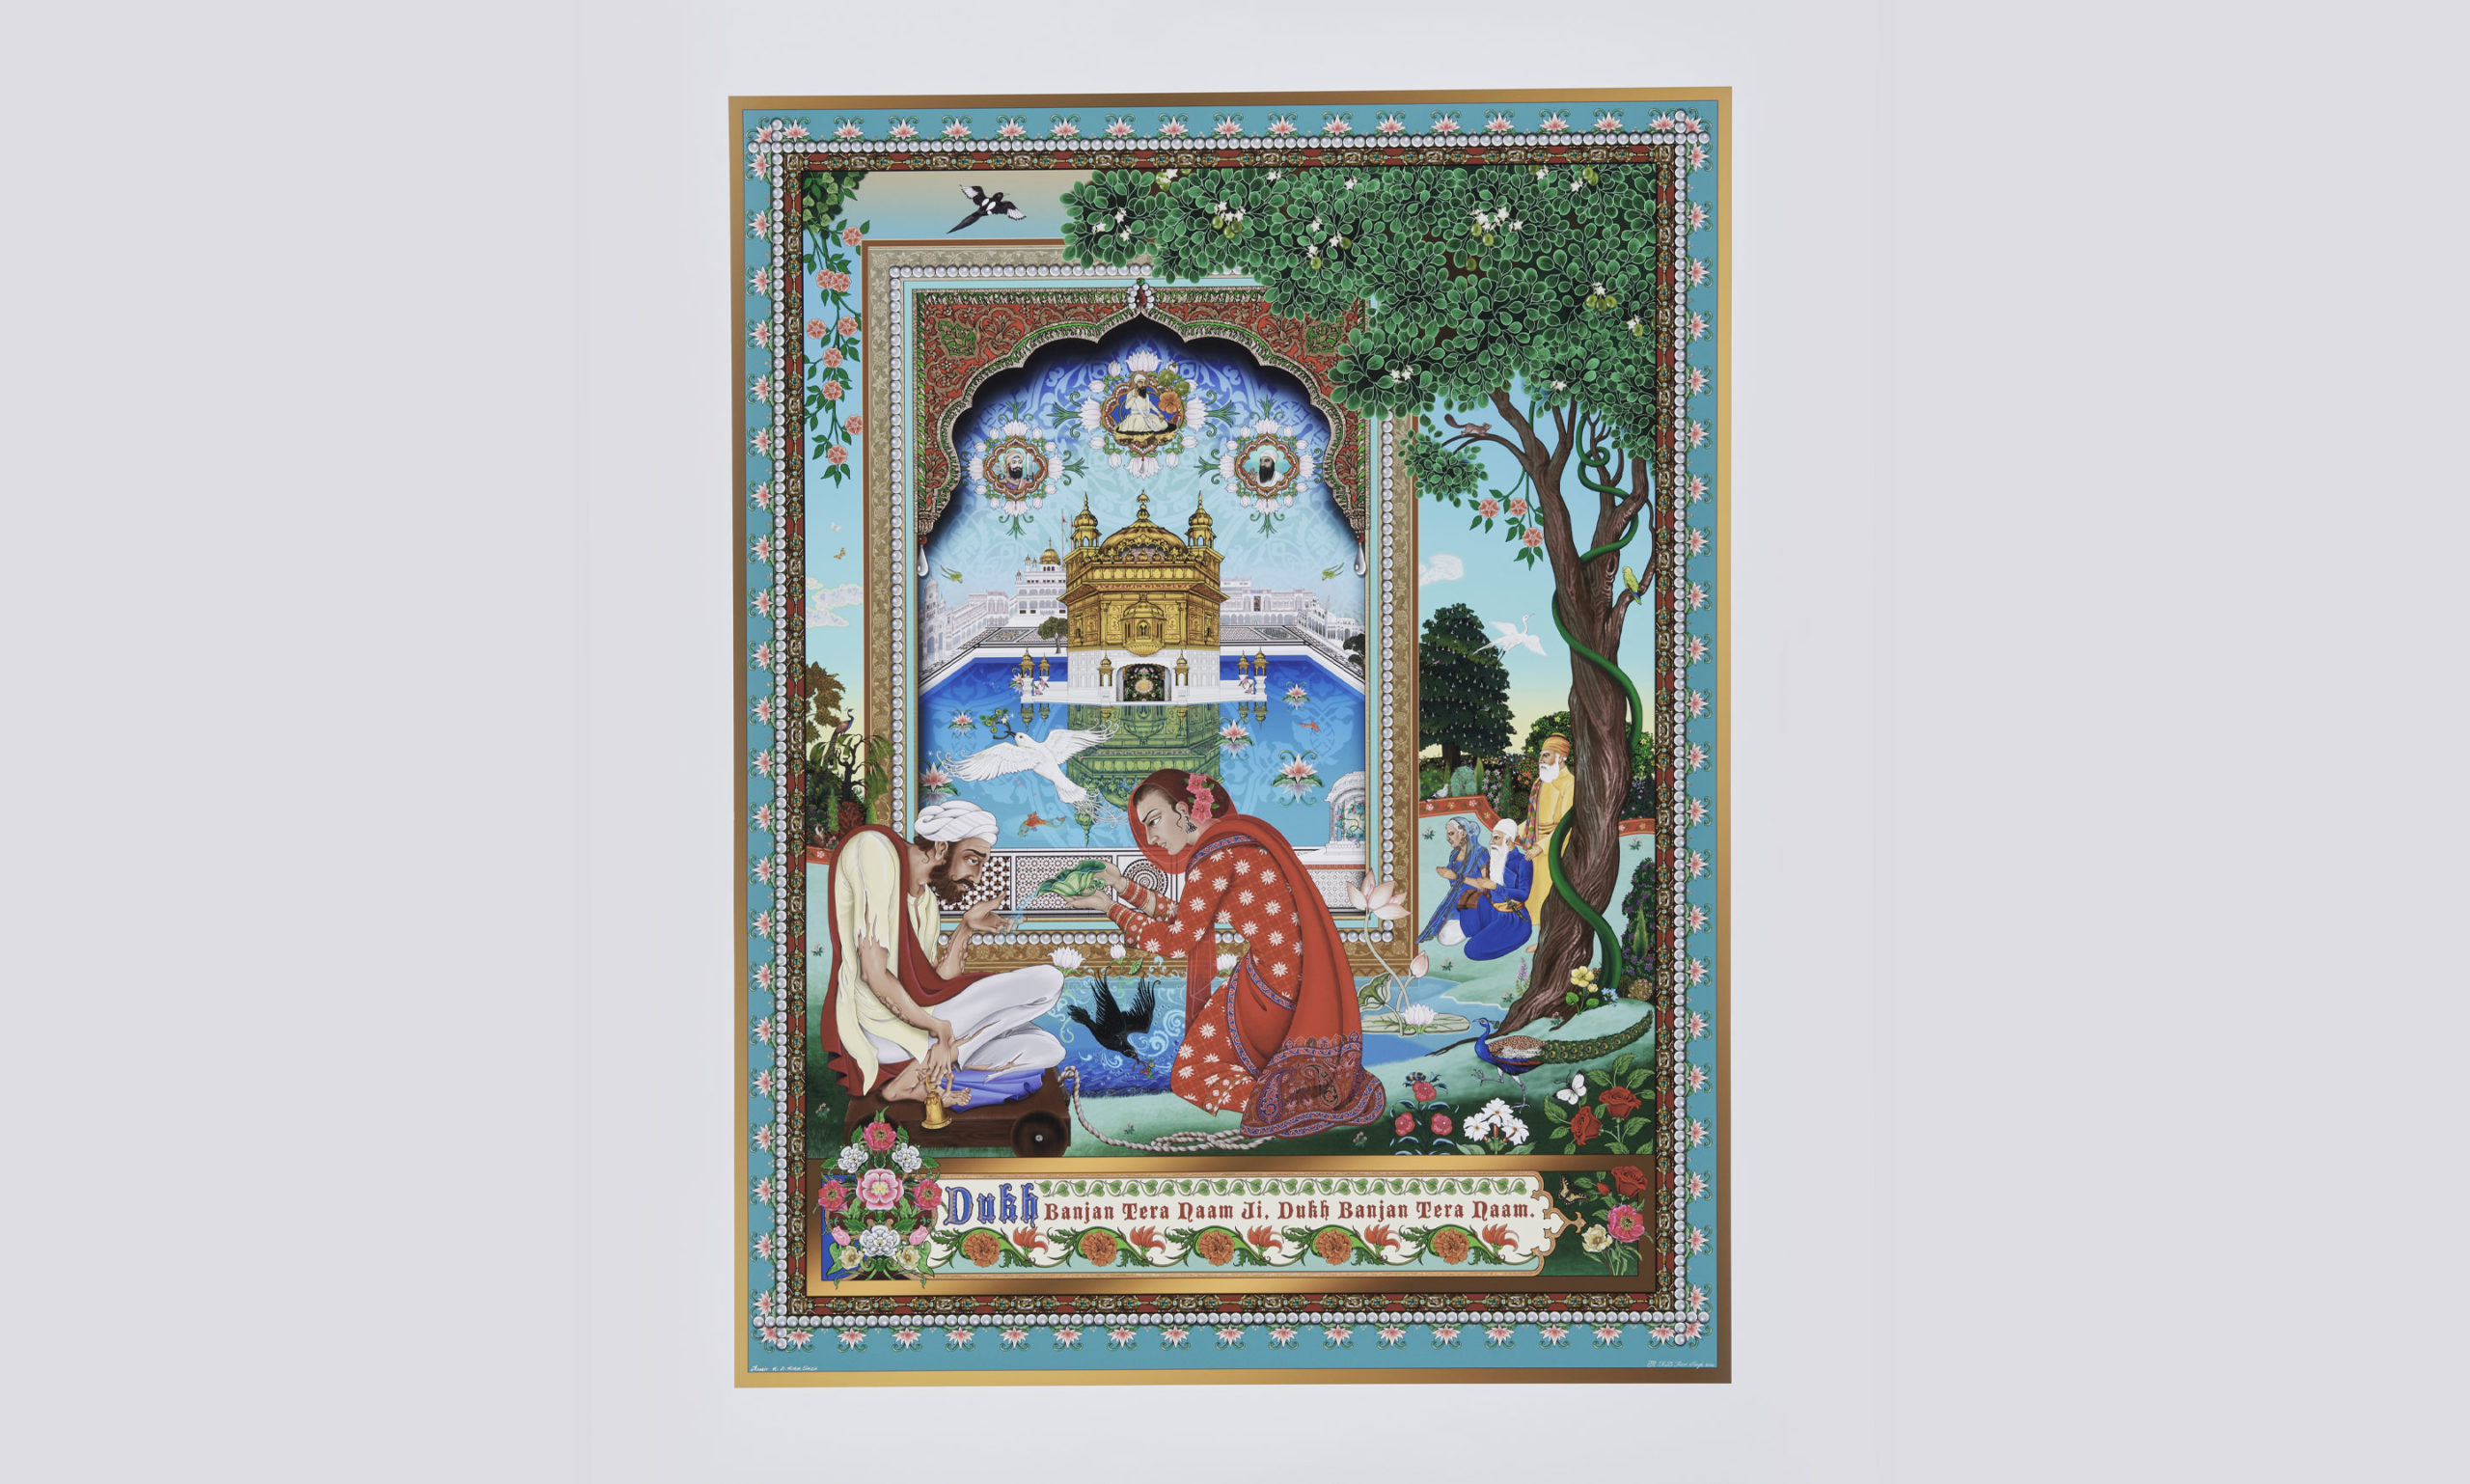 The Singh Twins, Amrit & Ravindran RD Kaur Singh, The Golden Temple - Dukh Bhanjani Beri: Rajani and the Leper, 2020. Mixed media digital print with overworking done by hand. Loan from the Khanuja Family Collection.